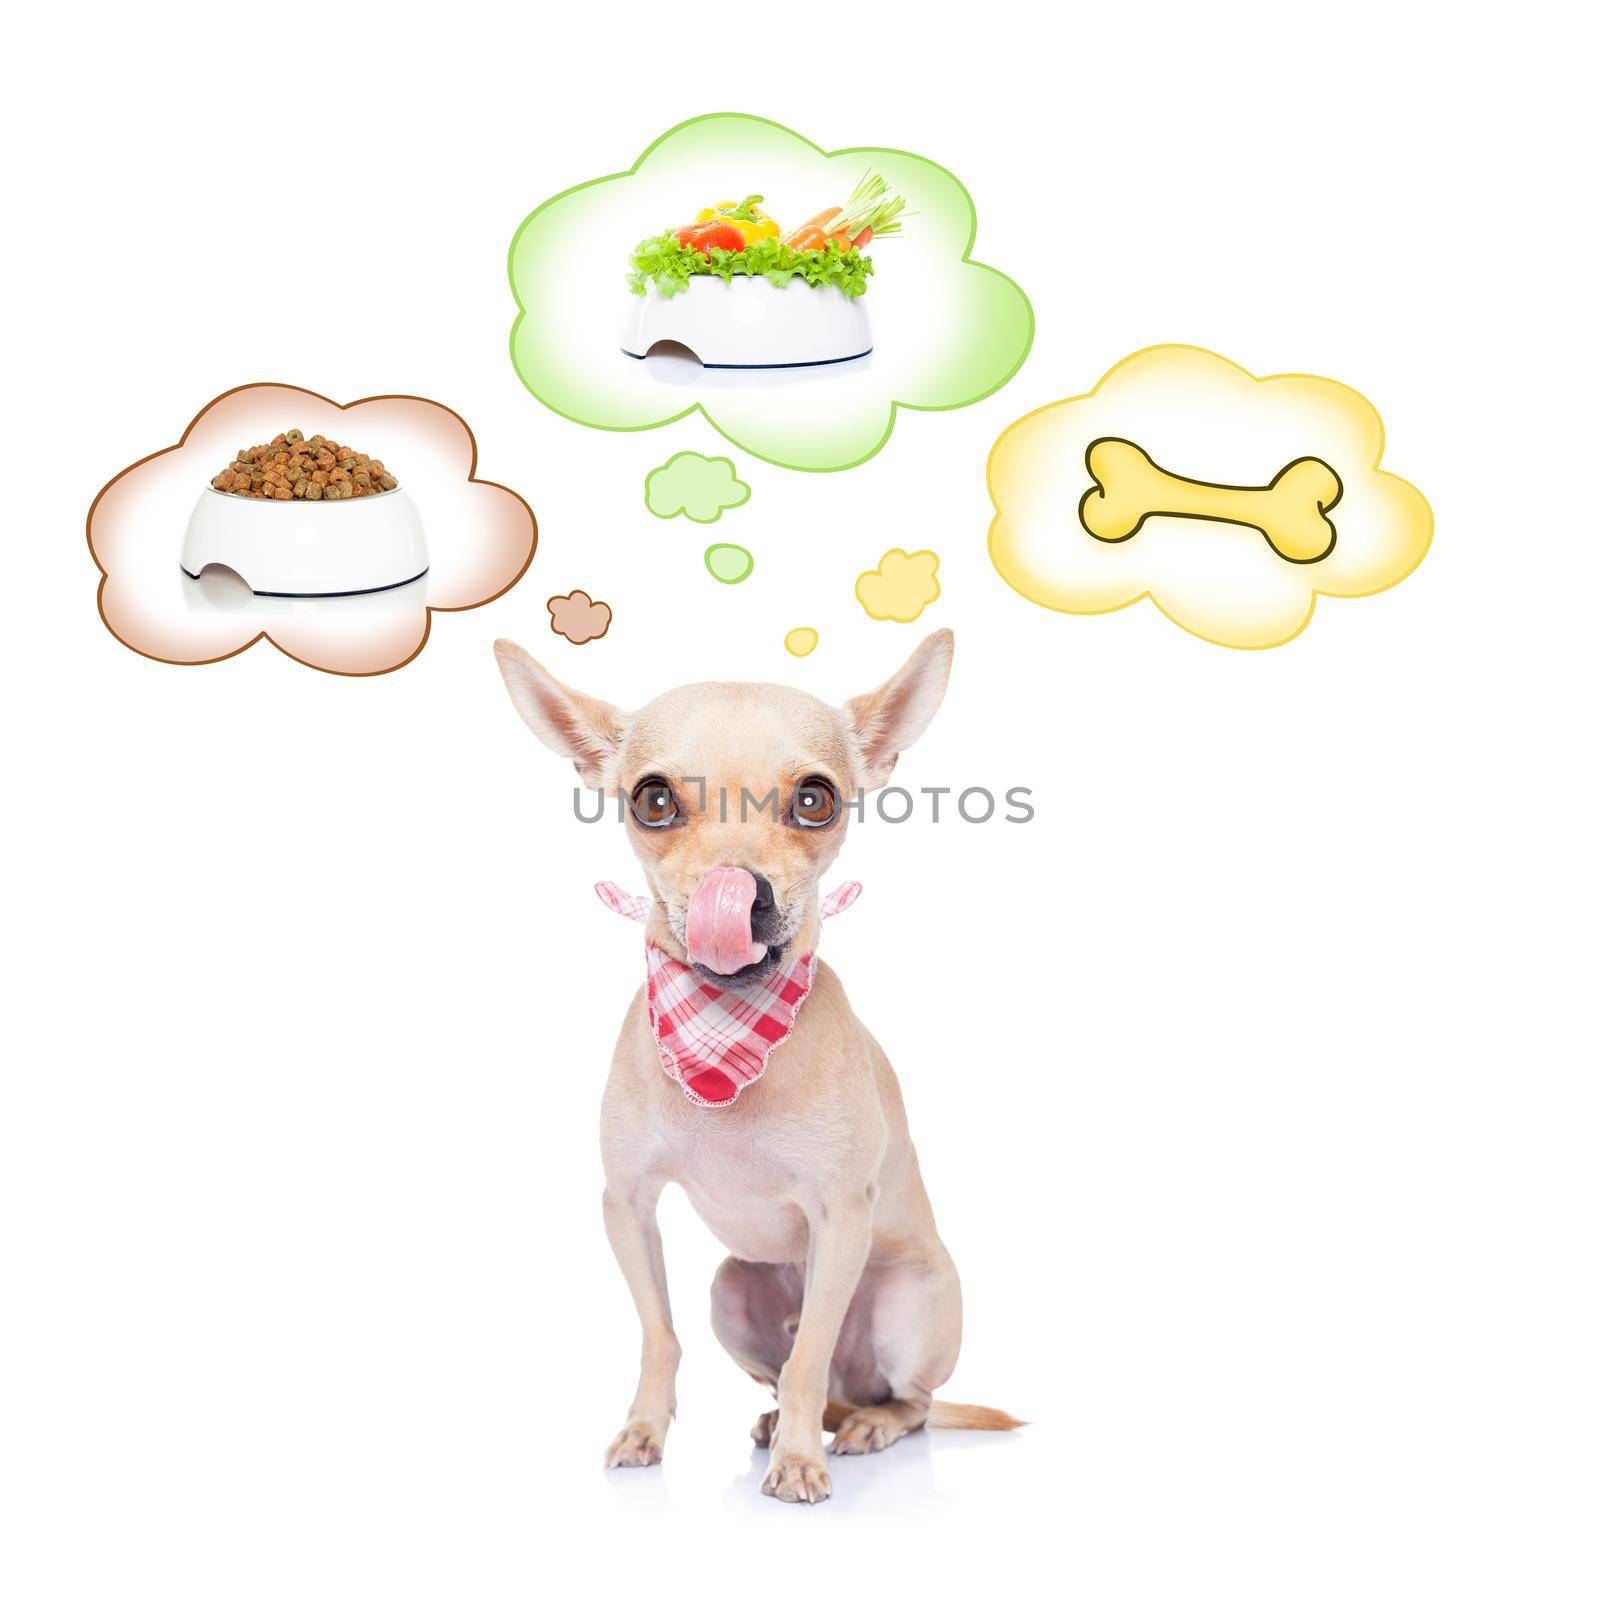 hungry chihuahua dog thinking about the choice between food bowl, vegan bowl or  a big bone , in 3 speech bubbles, isolated on white background